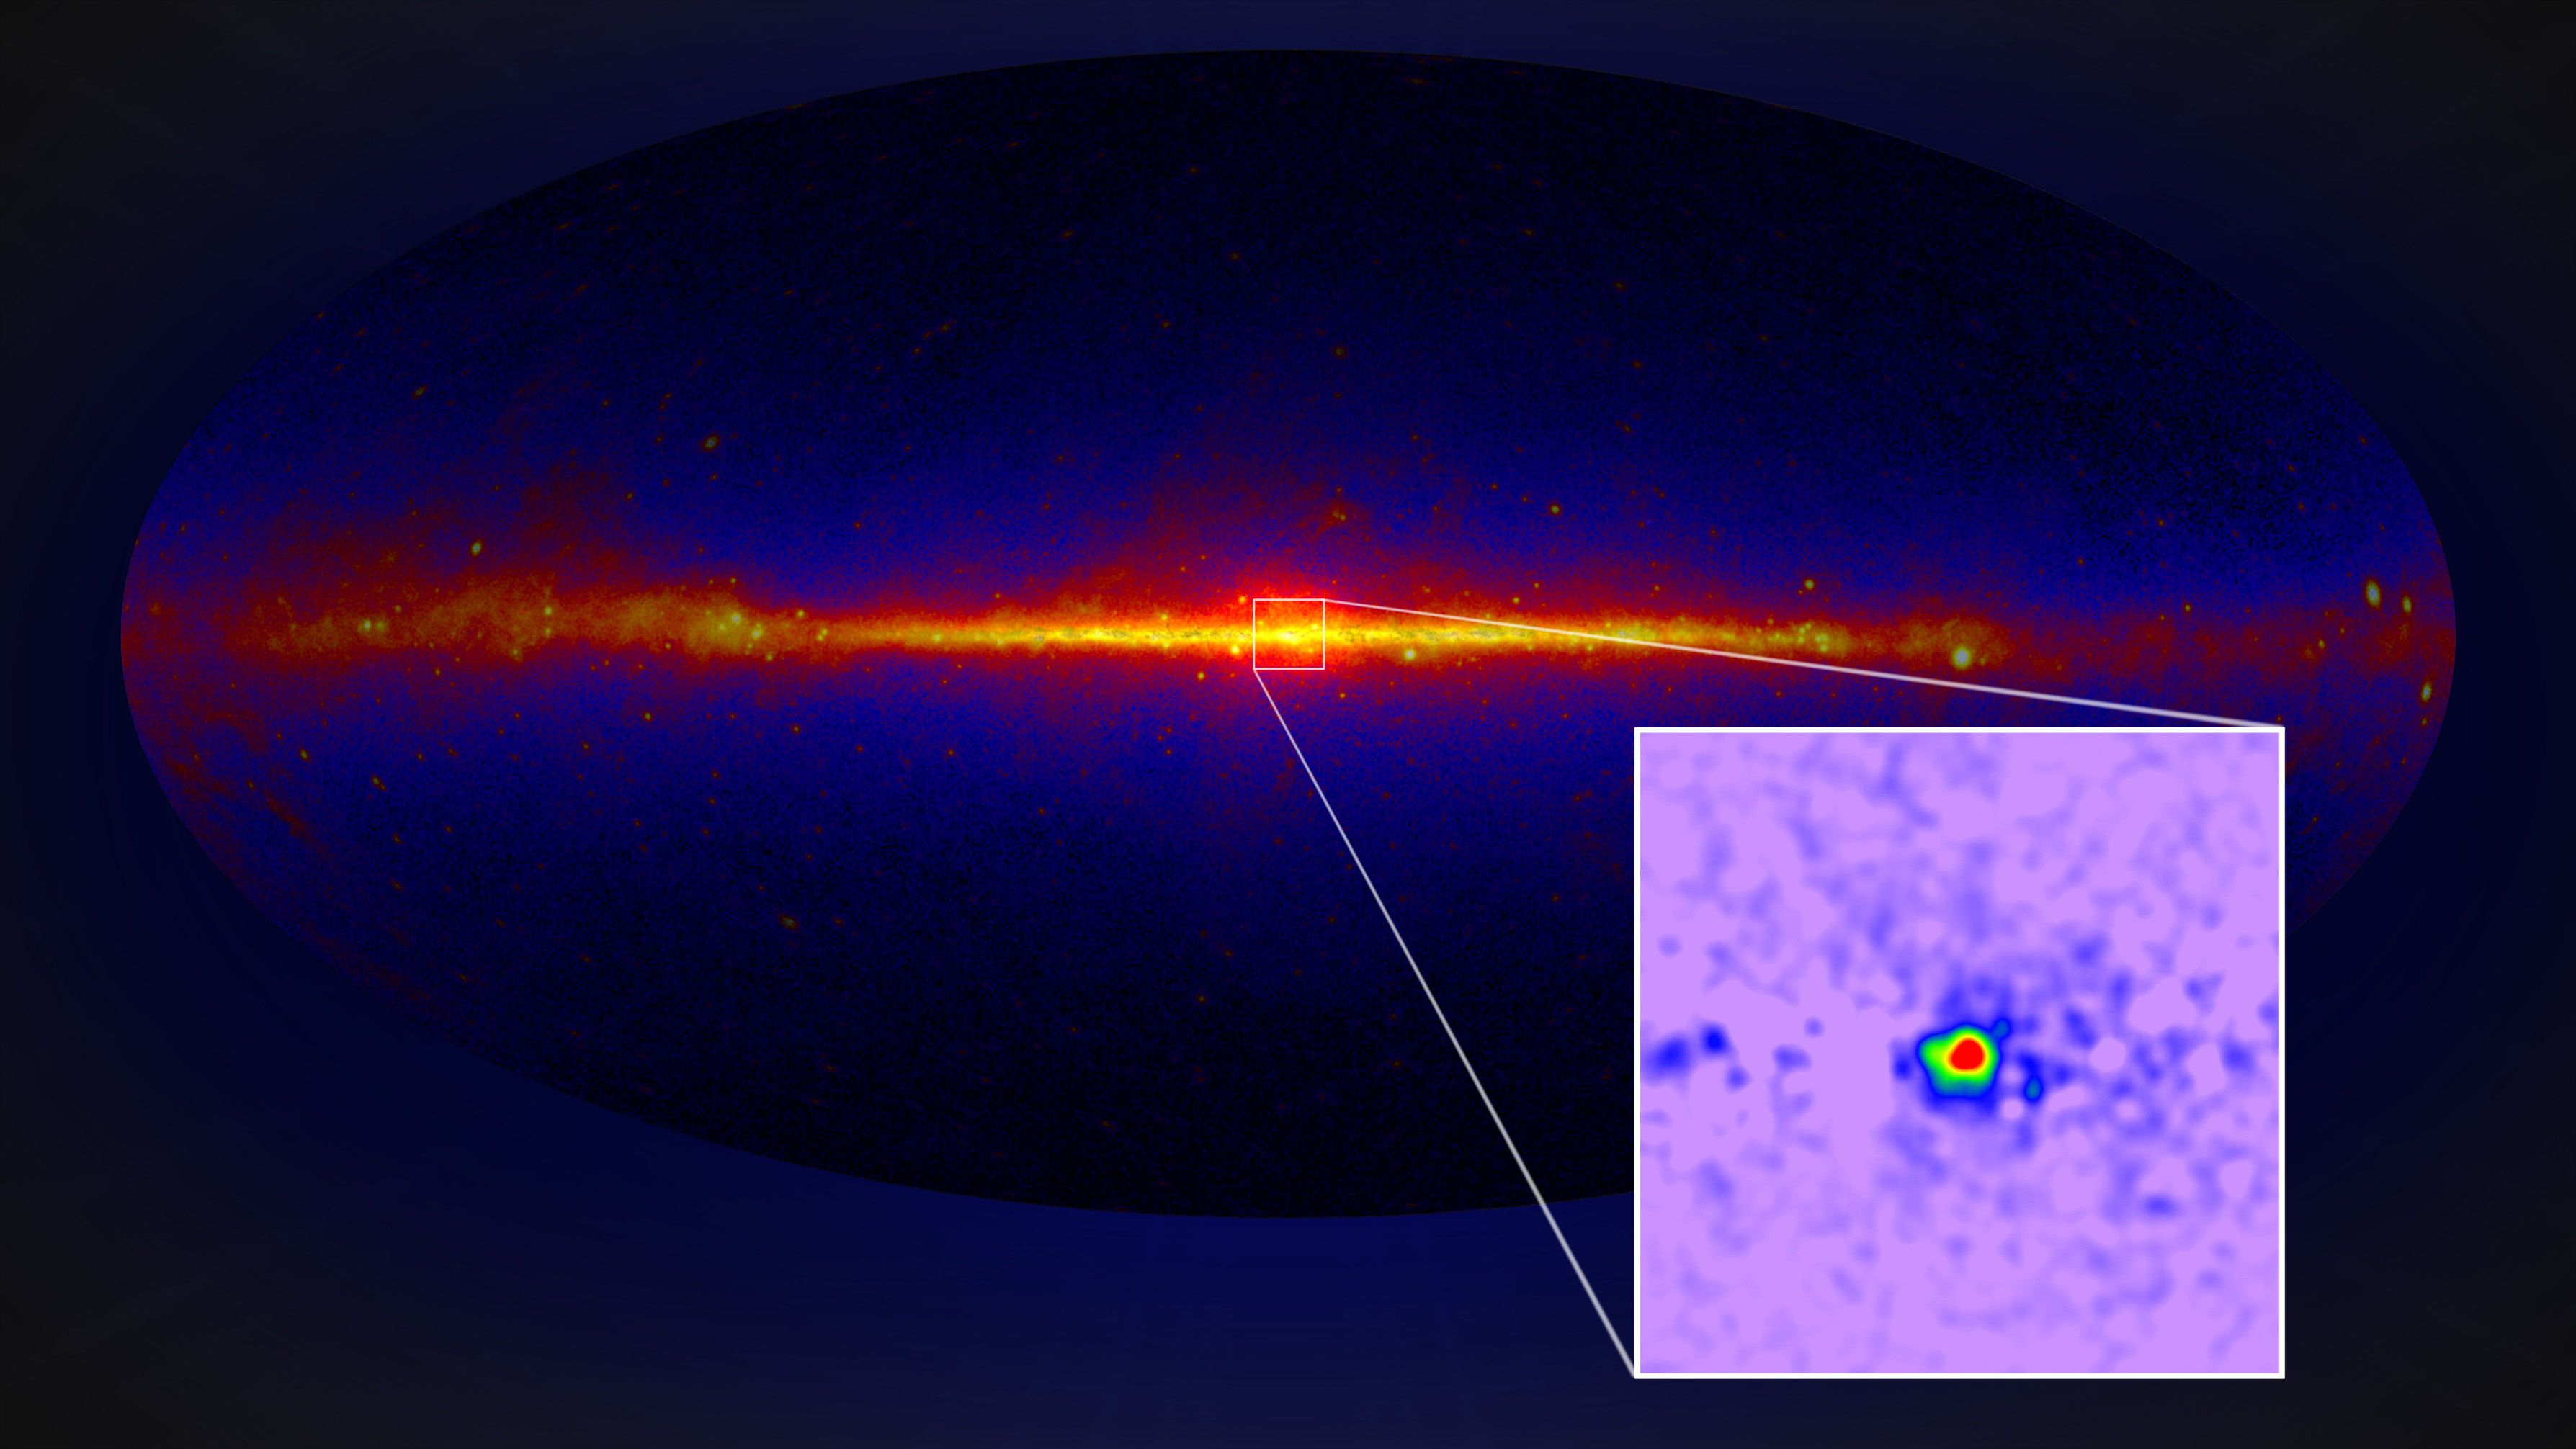 Is there dark matter at the center of the Milky Way? MIT News